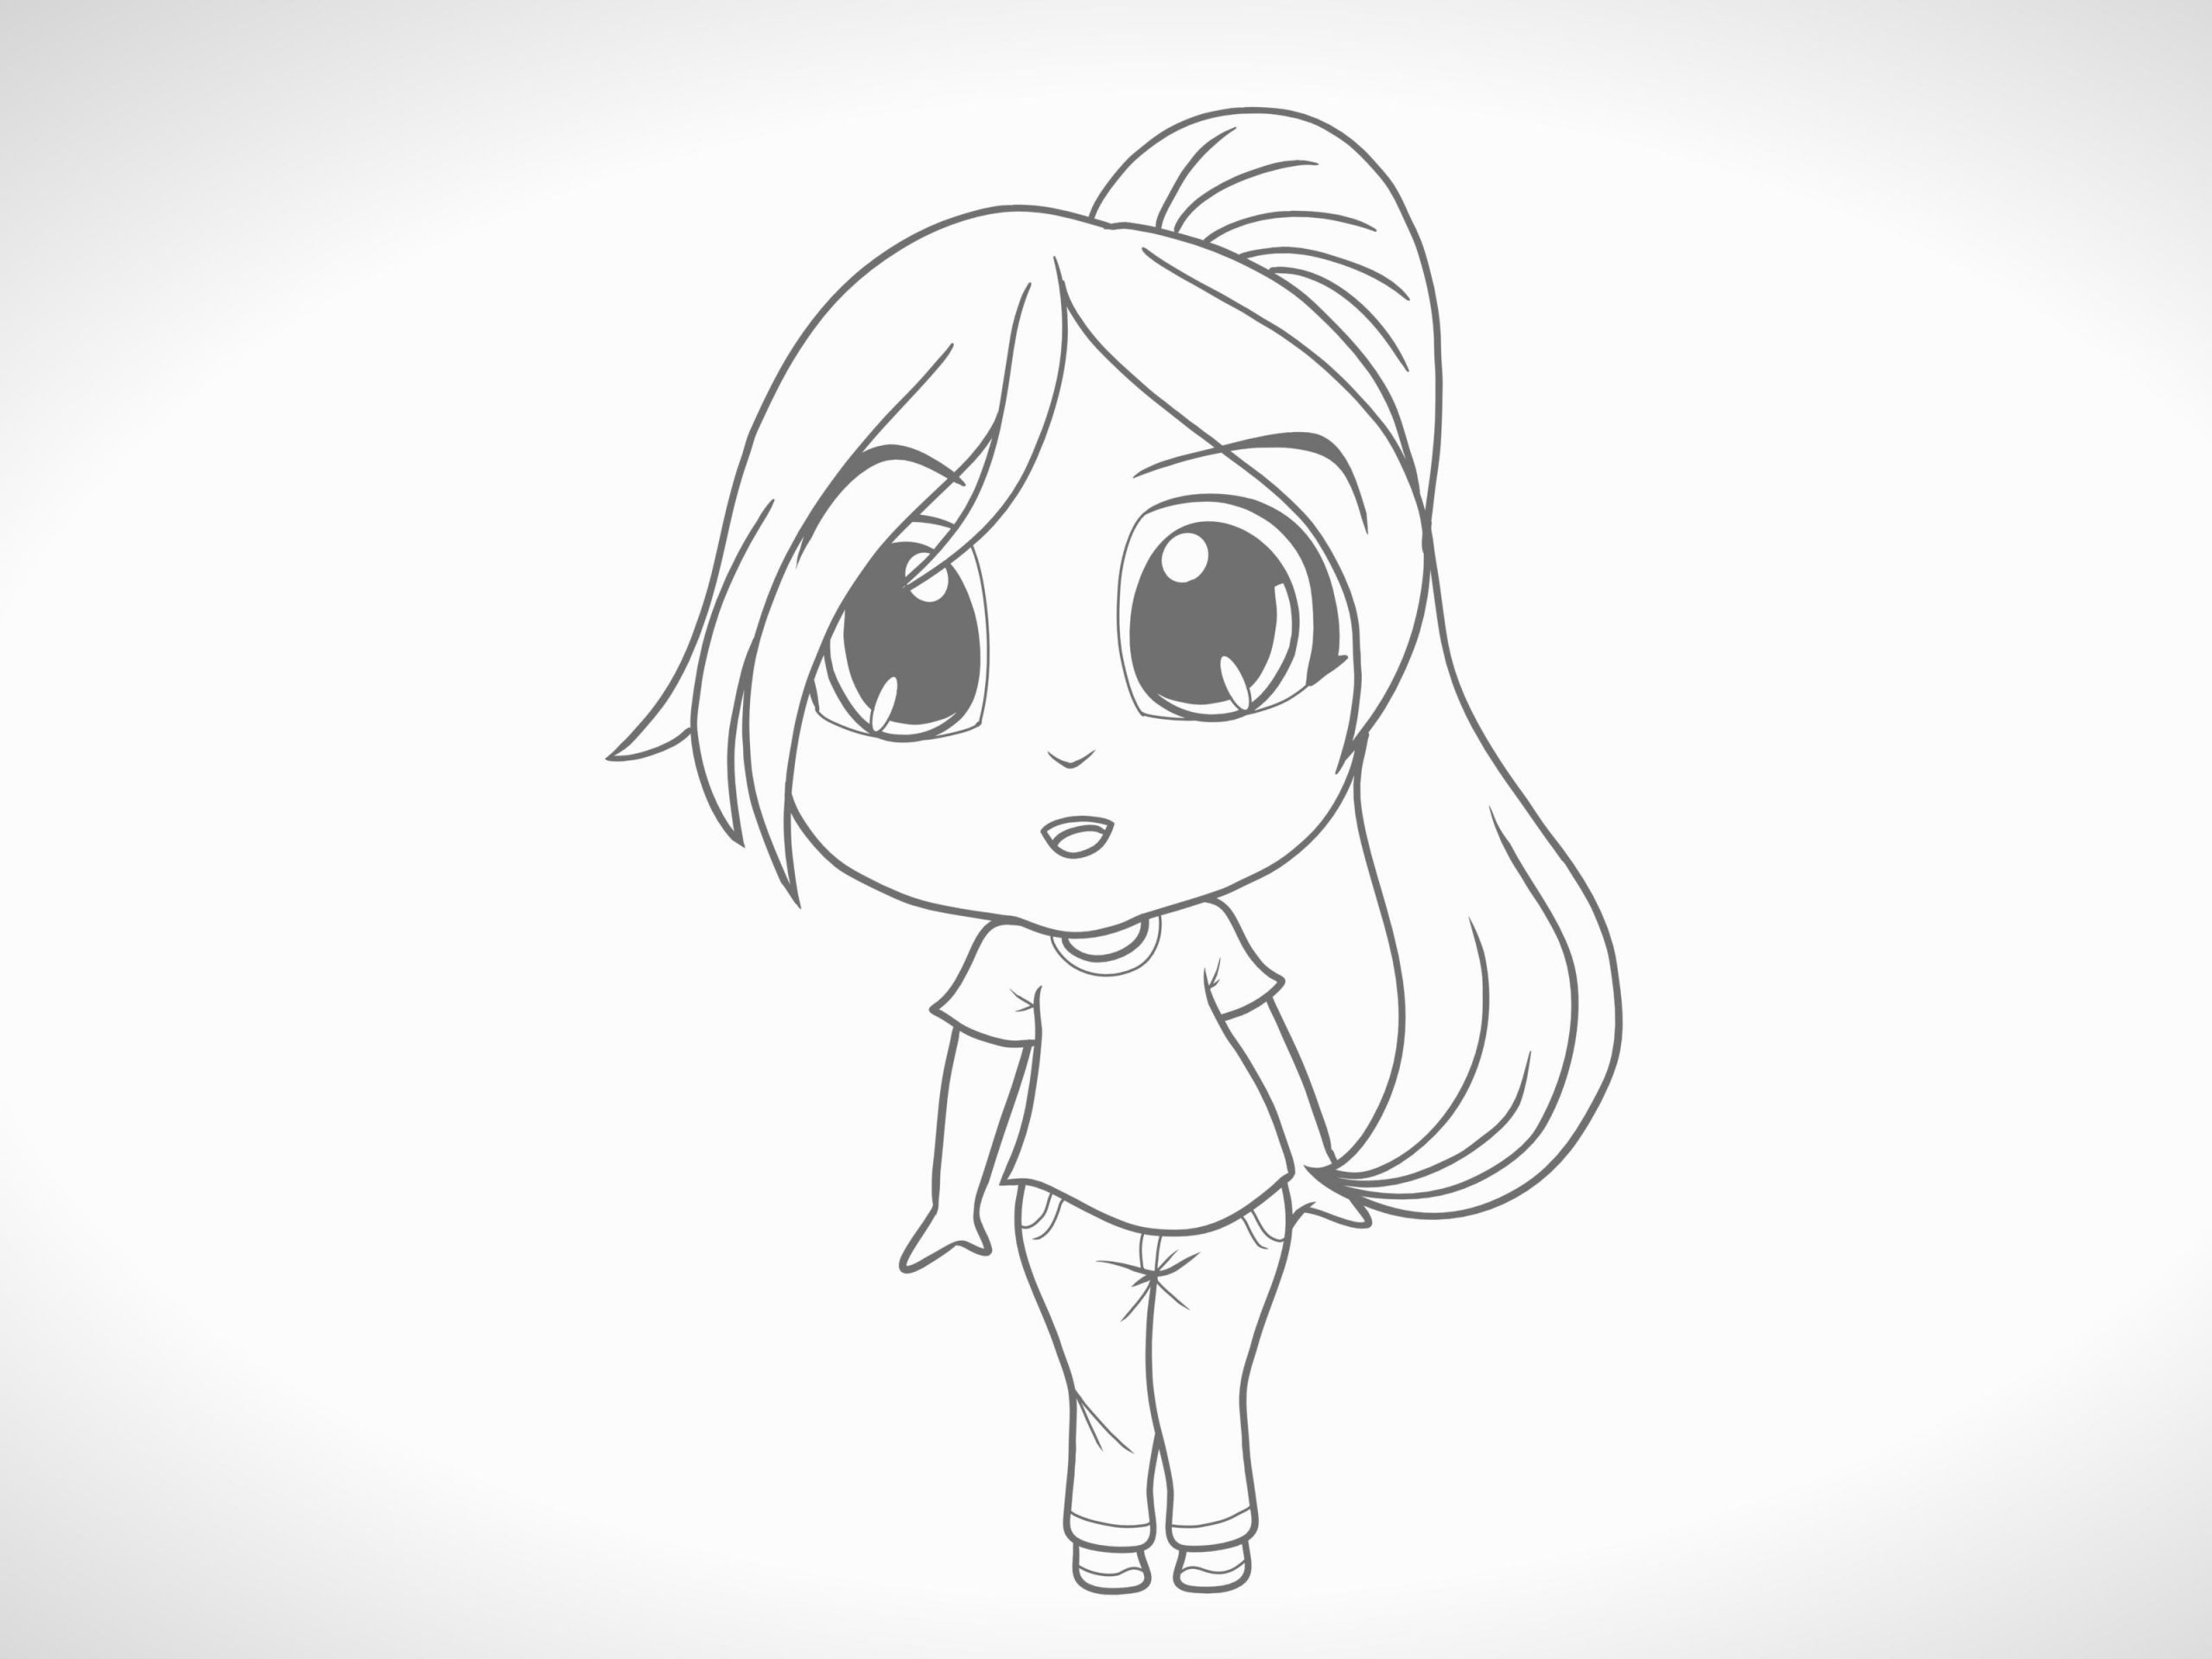 Easy Things to Draw for Your Best Friend How to Draw A Chibi Character 12 Steps with Pictures